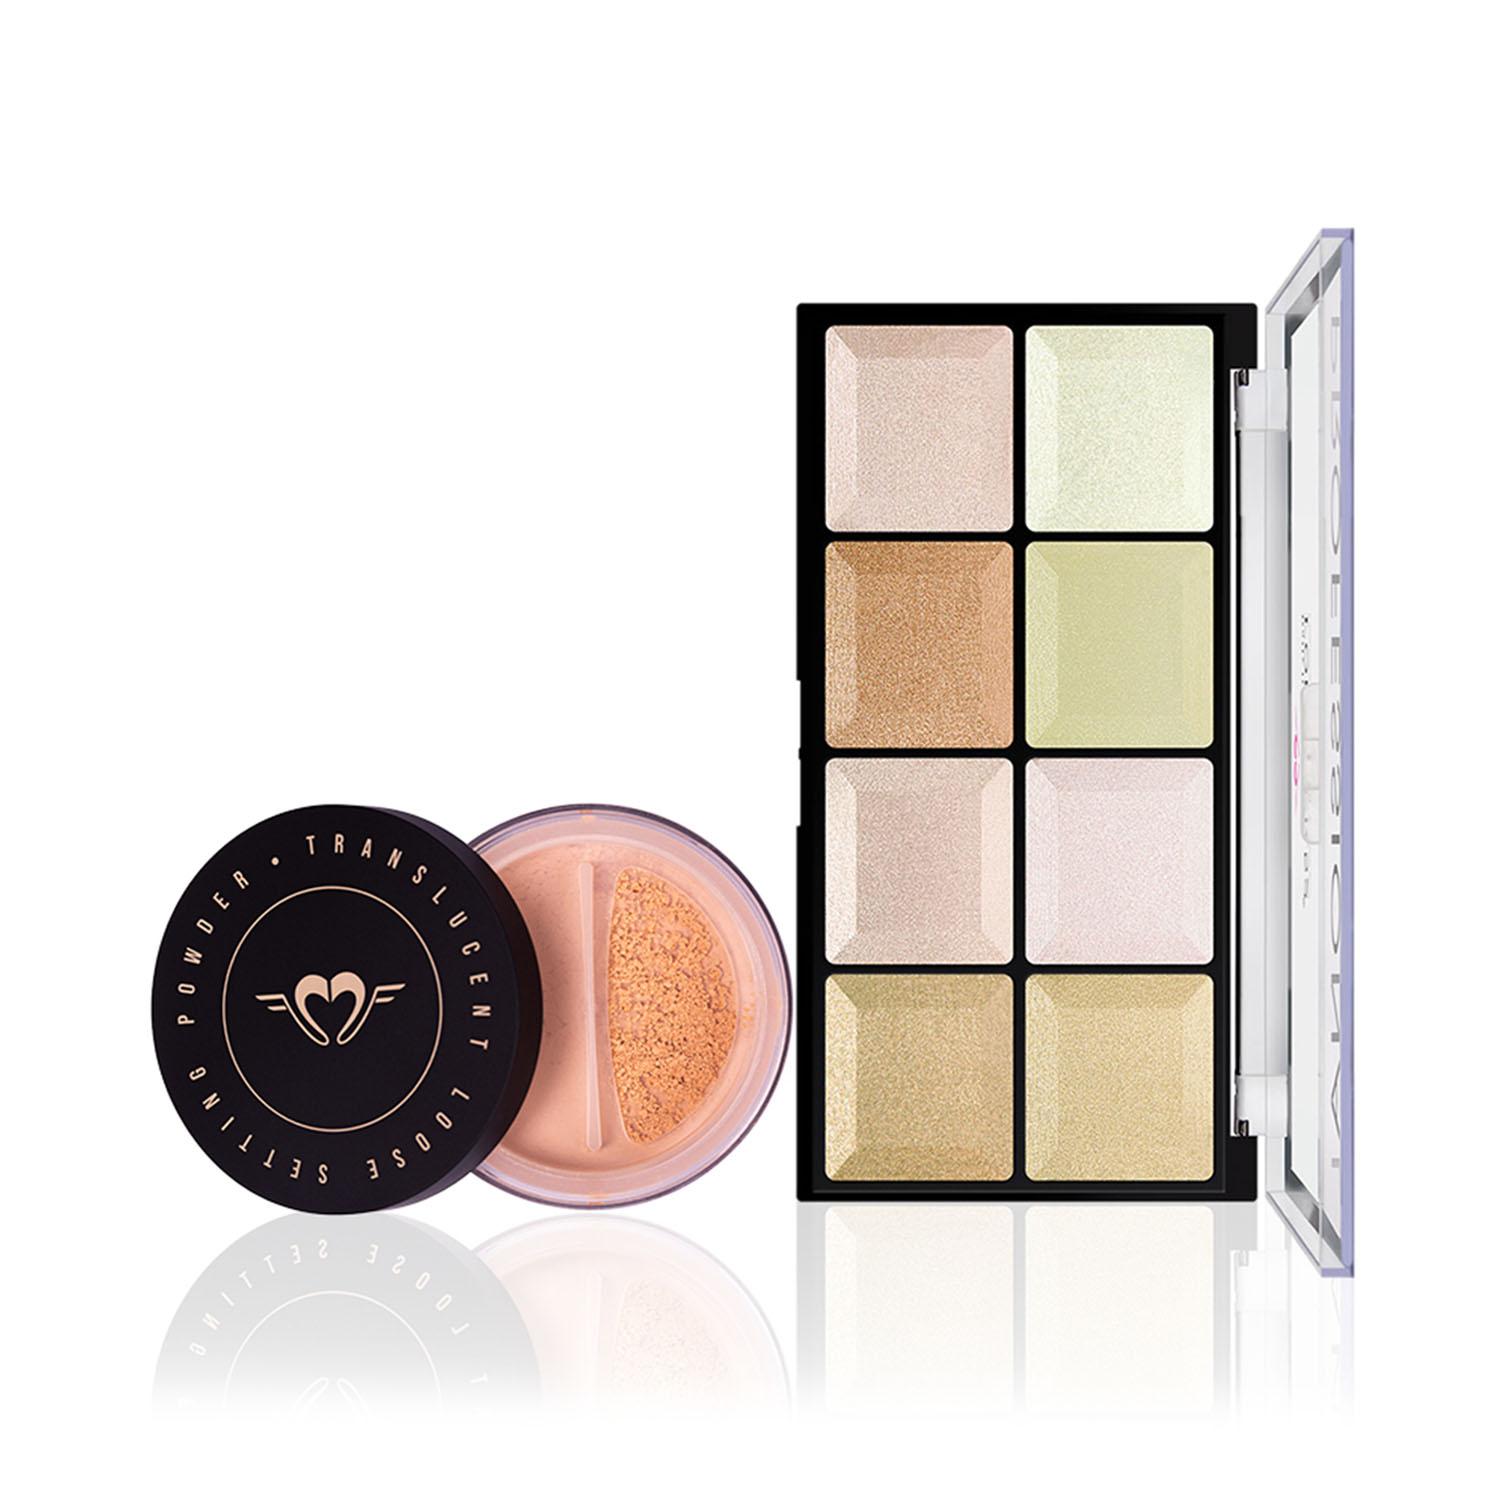 Daily Life Forever52 | Daily Life Forever52 Spotlight Highlighter Palette & Loose Setting Powder Combo (Peach TLM005)